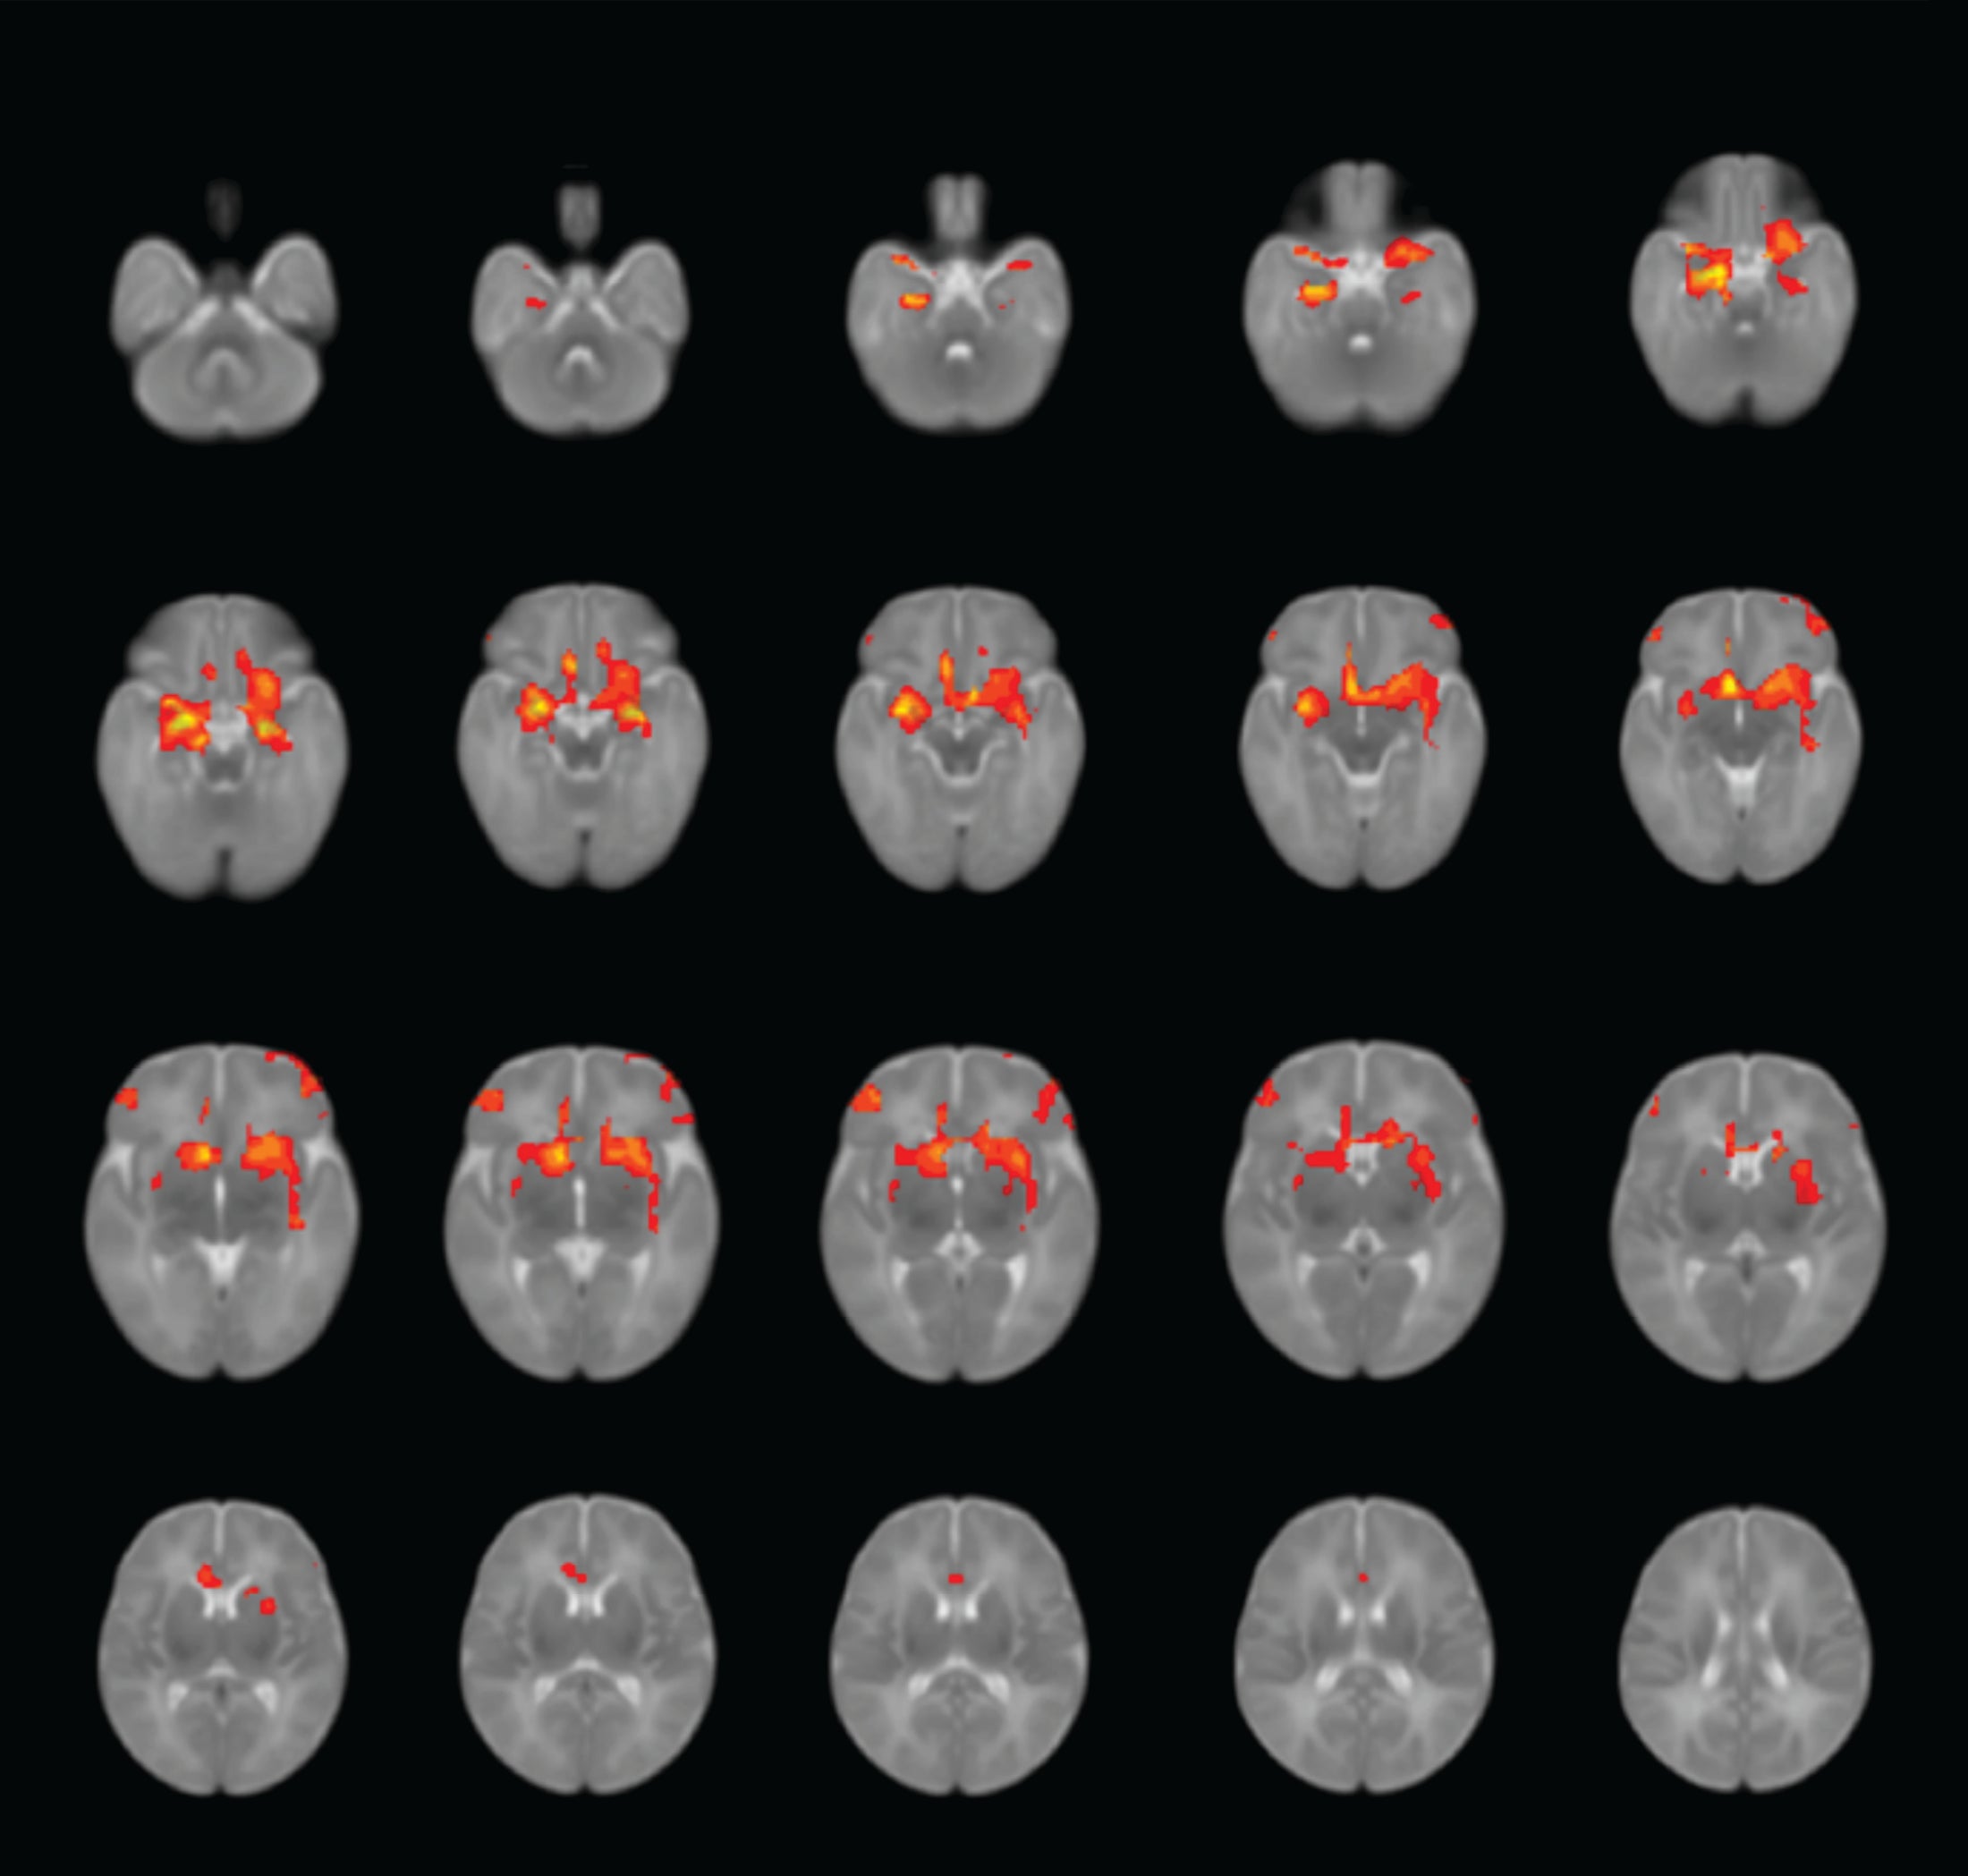 Brain scans showing average connectivity patterns between the amygdala and other regions in infants.